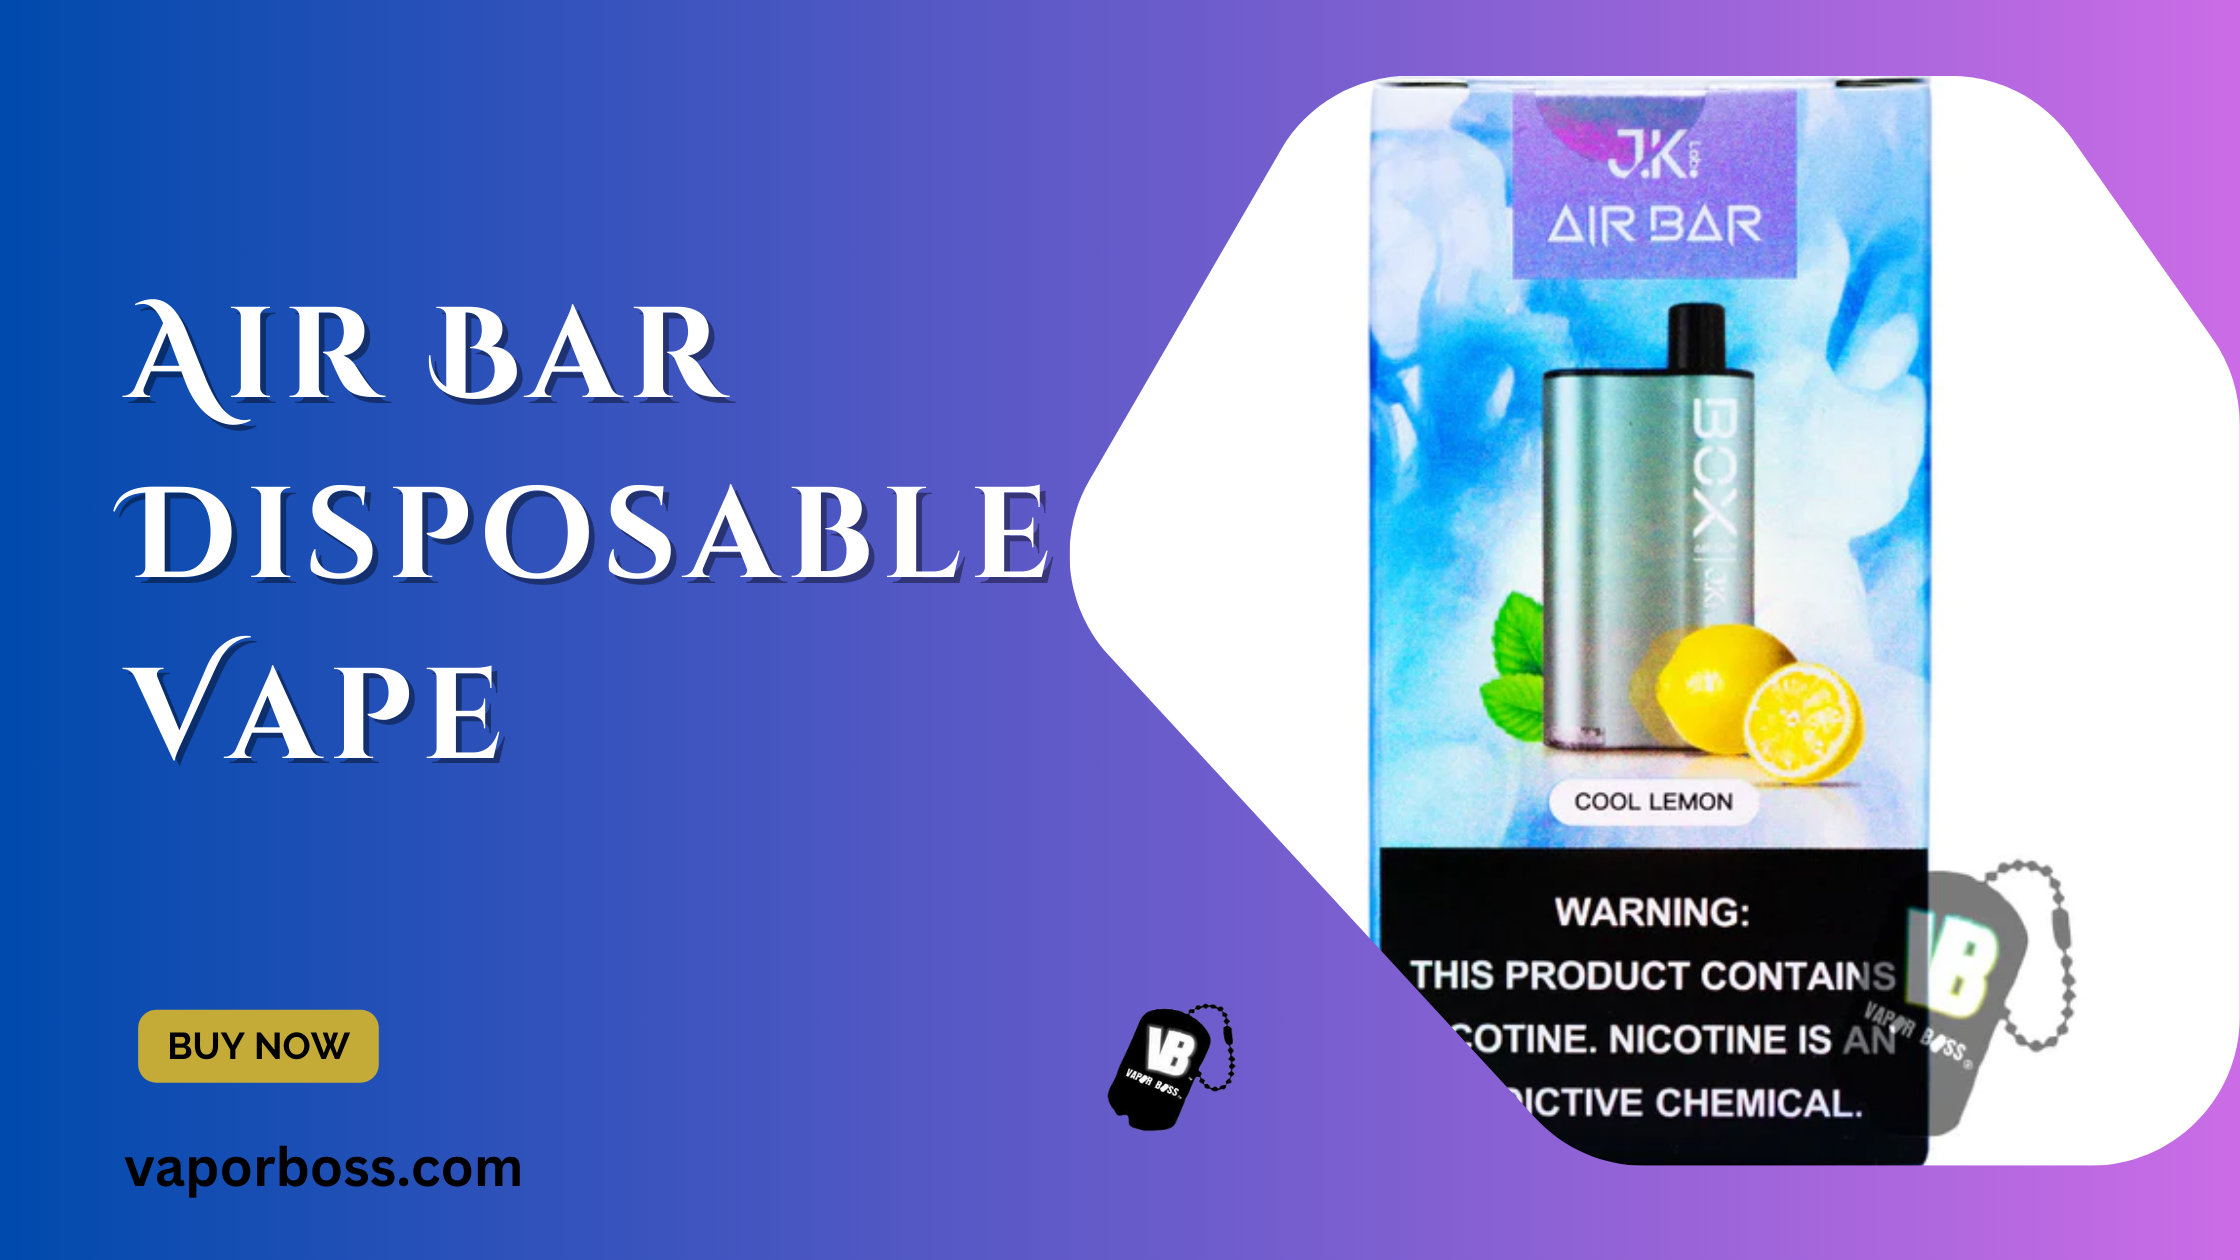 Don’t Aware About the Air Bar Box’s Goodness? This Blog Can Help You!